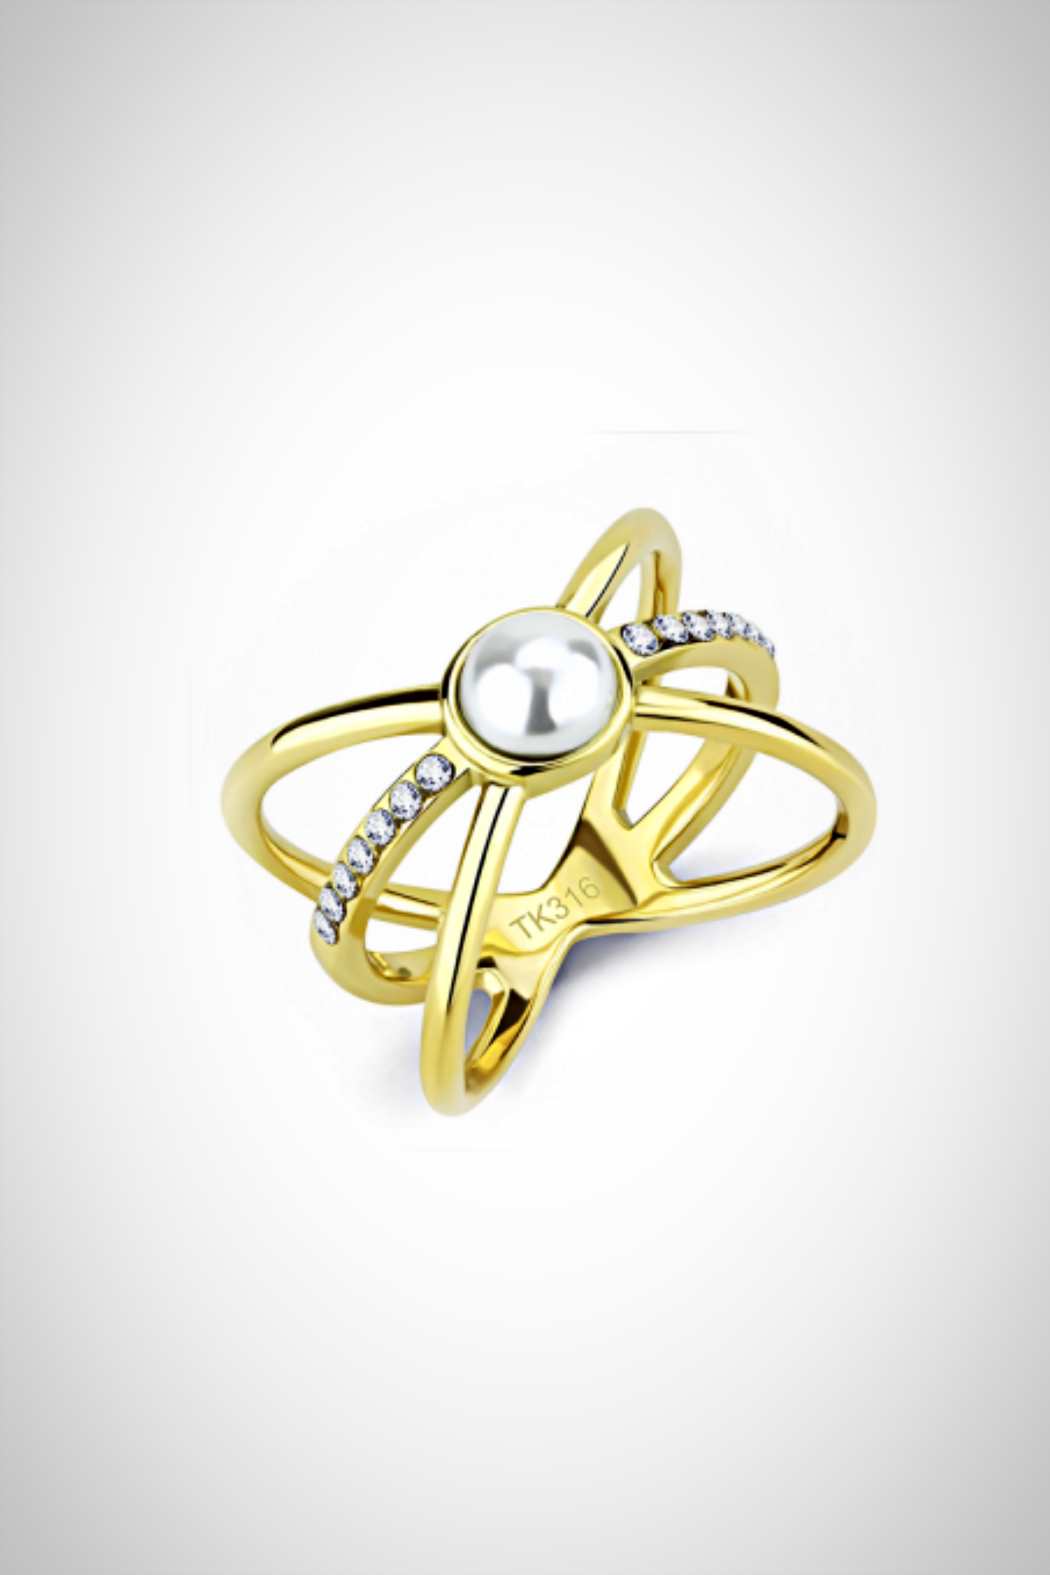 Pearl Crystal Ring - Embellish Your Life 